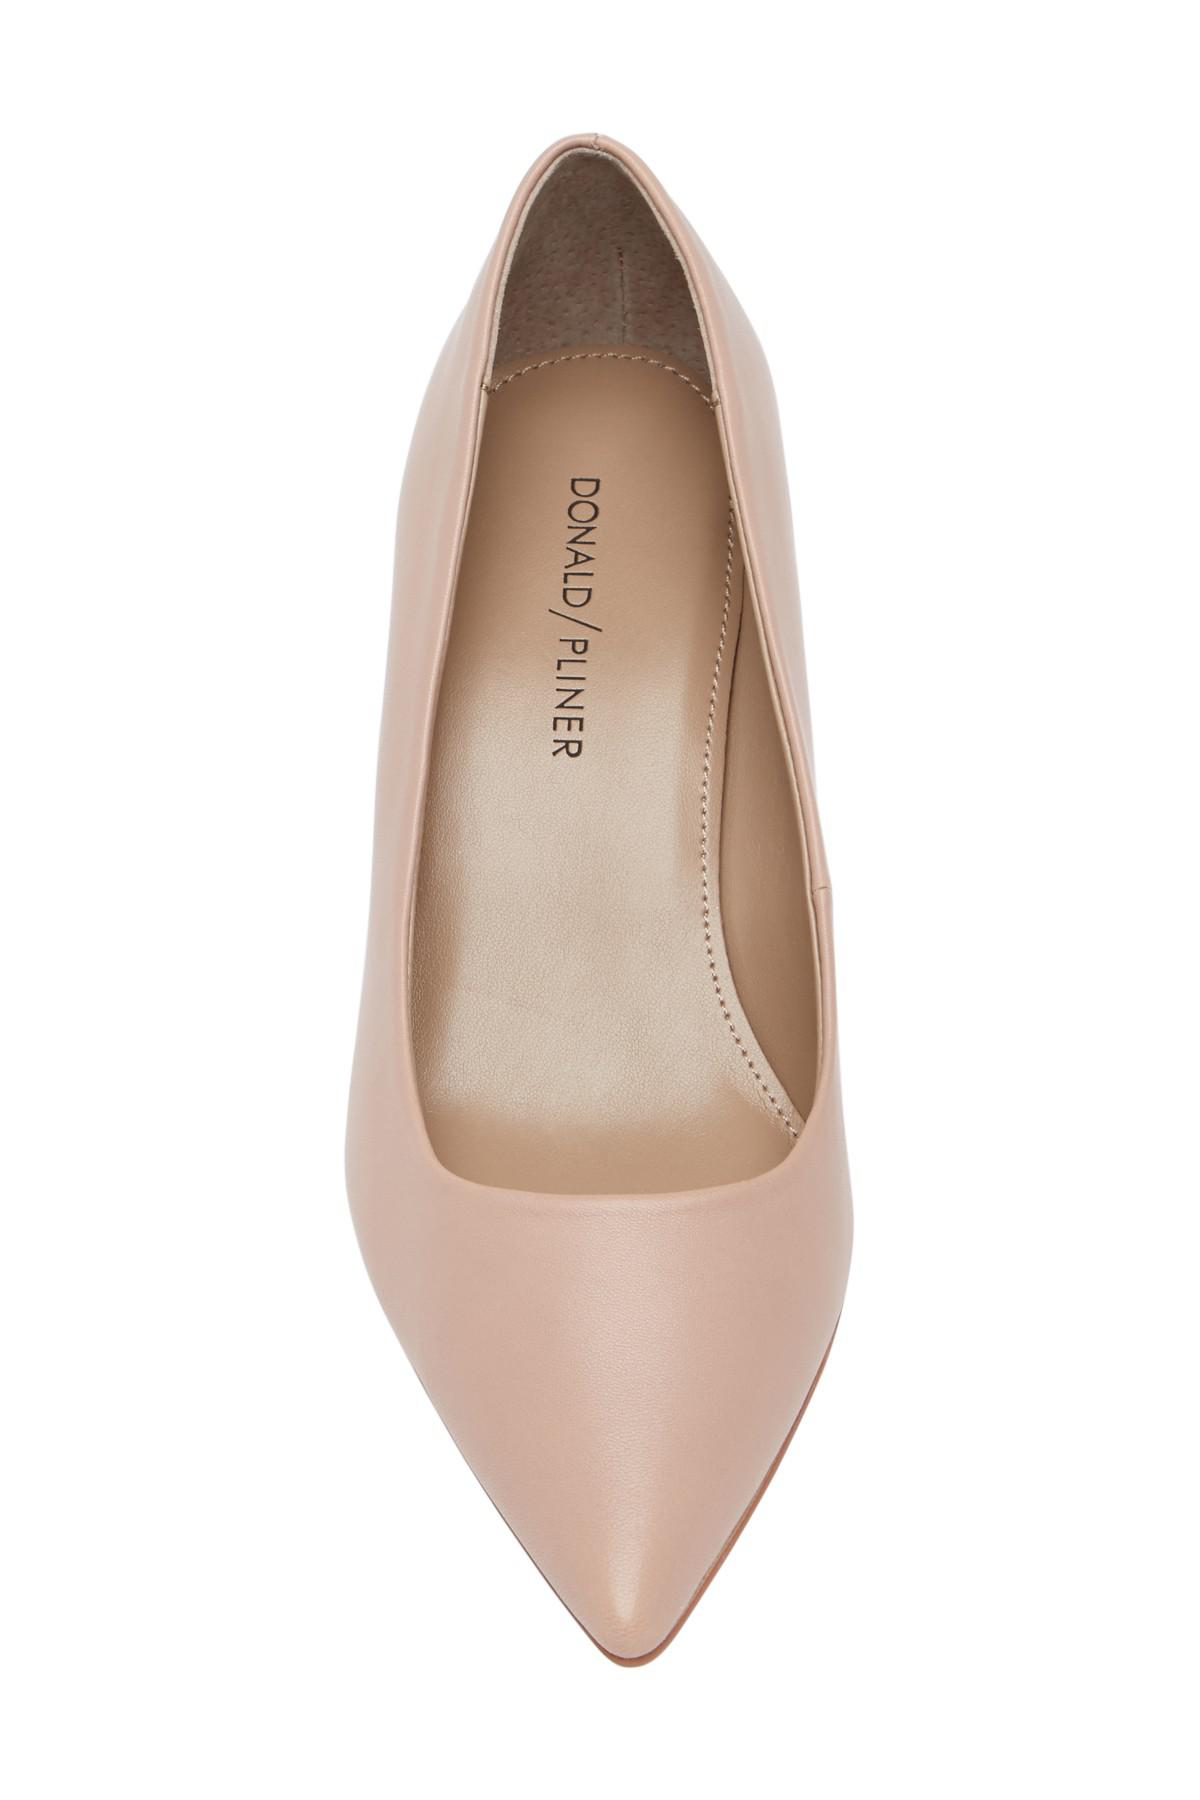 Donald J Pliner Anni Pointed Toe Leather Pump in Blush (Brown) - Lyst